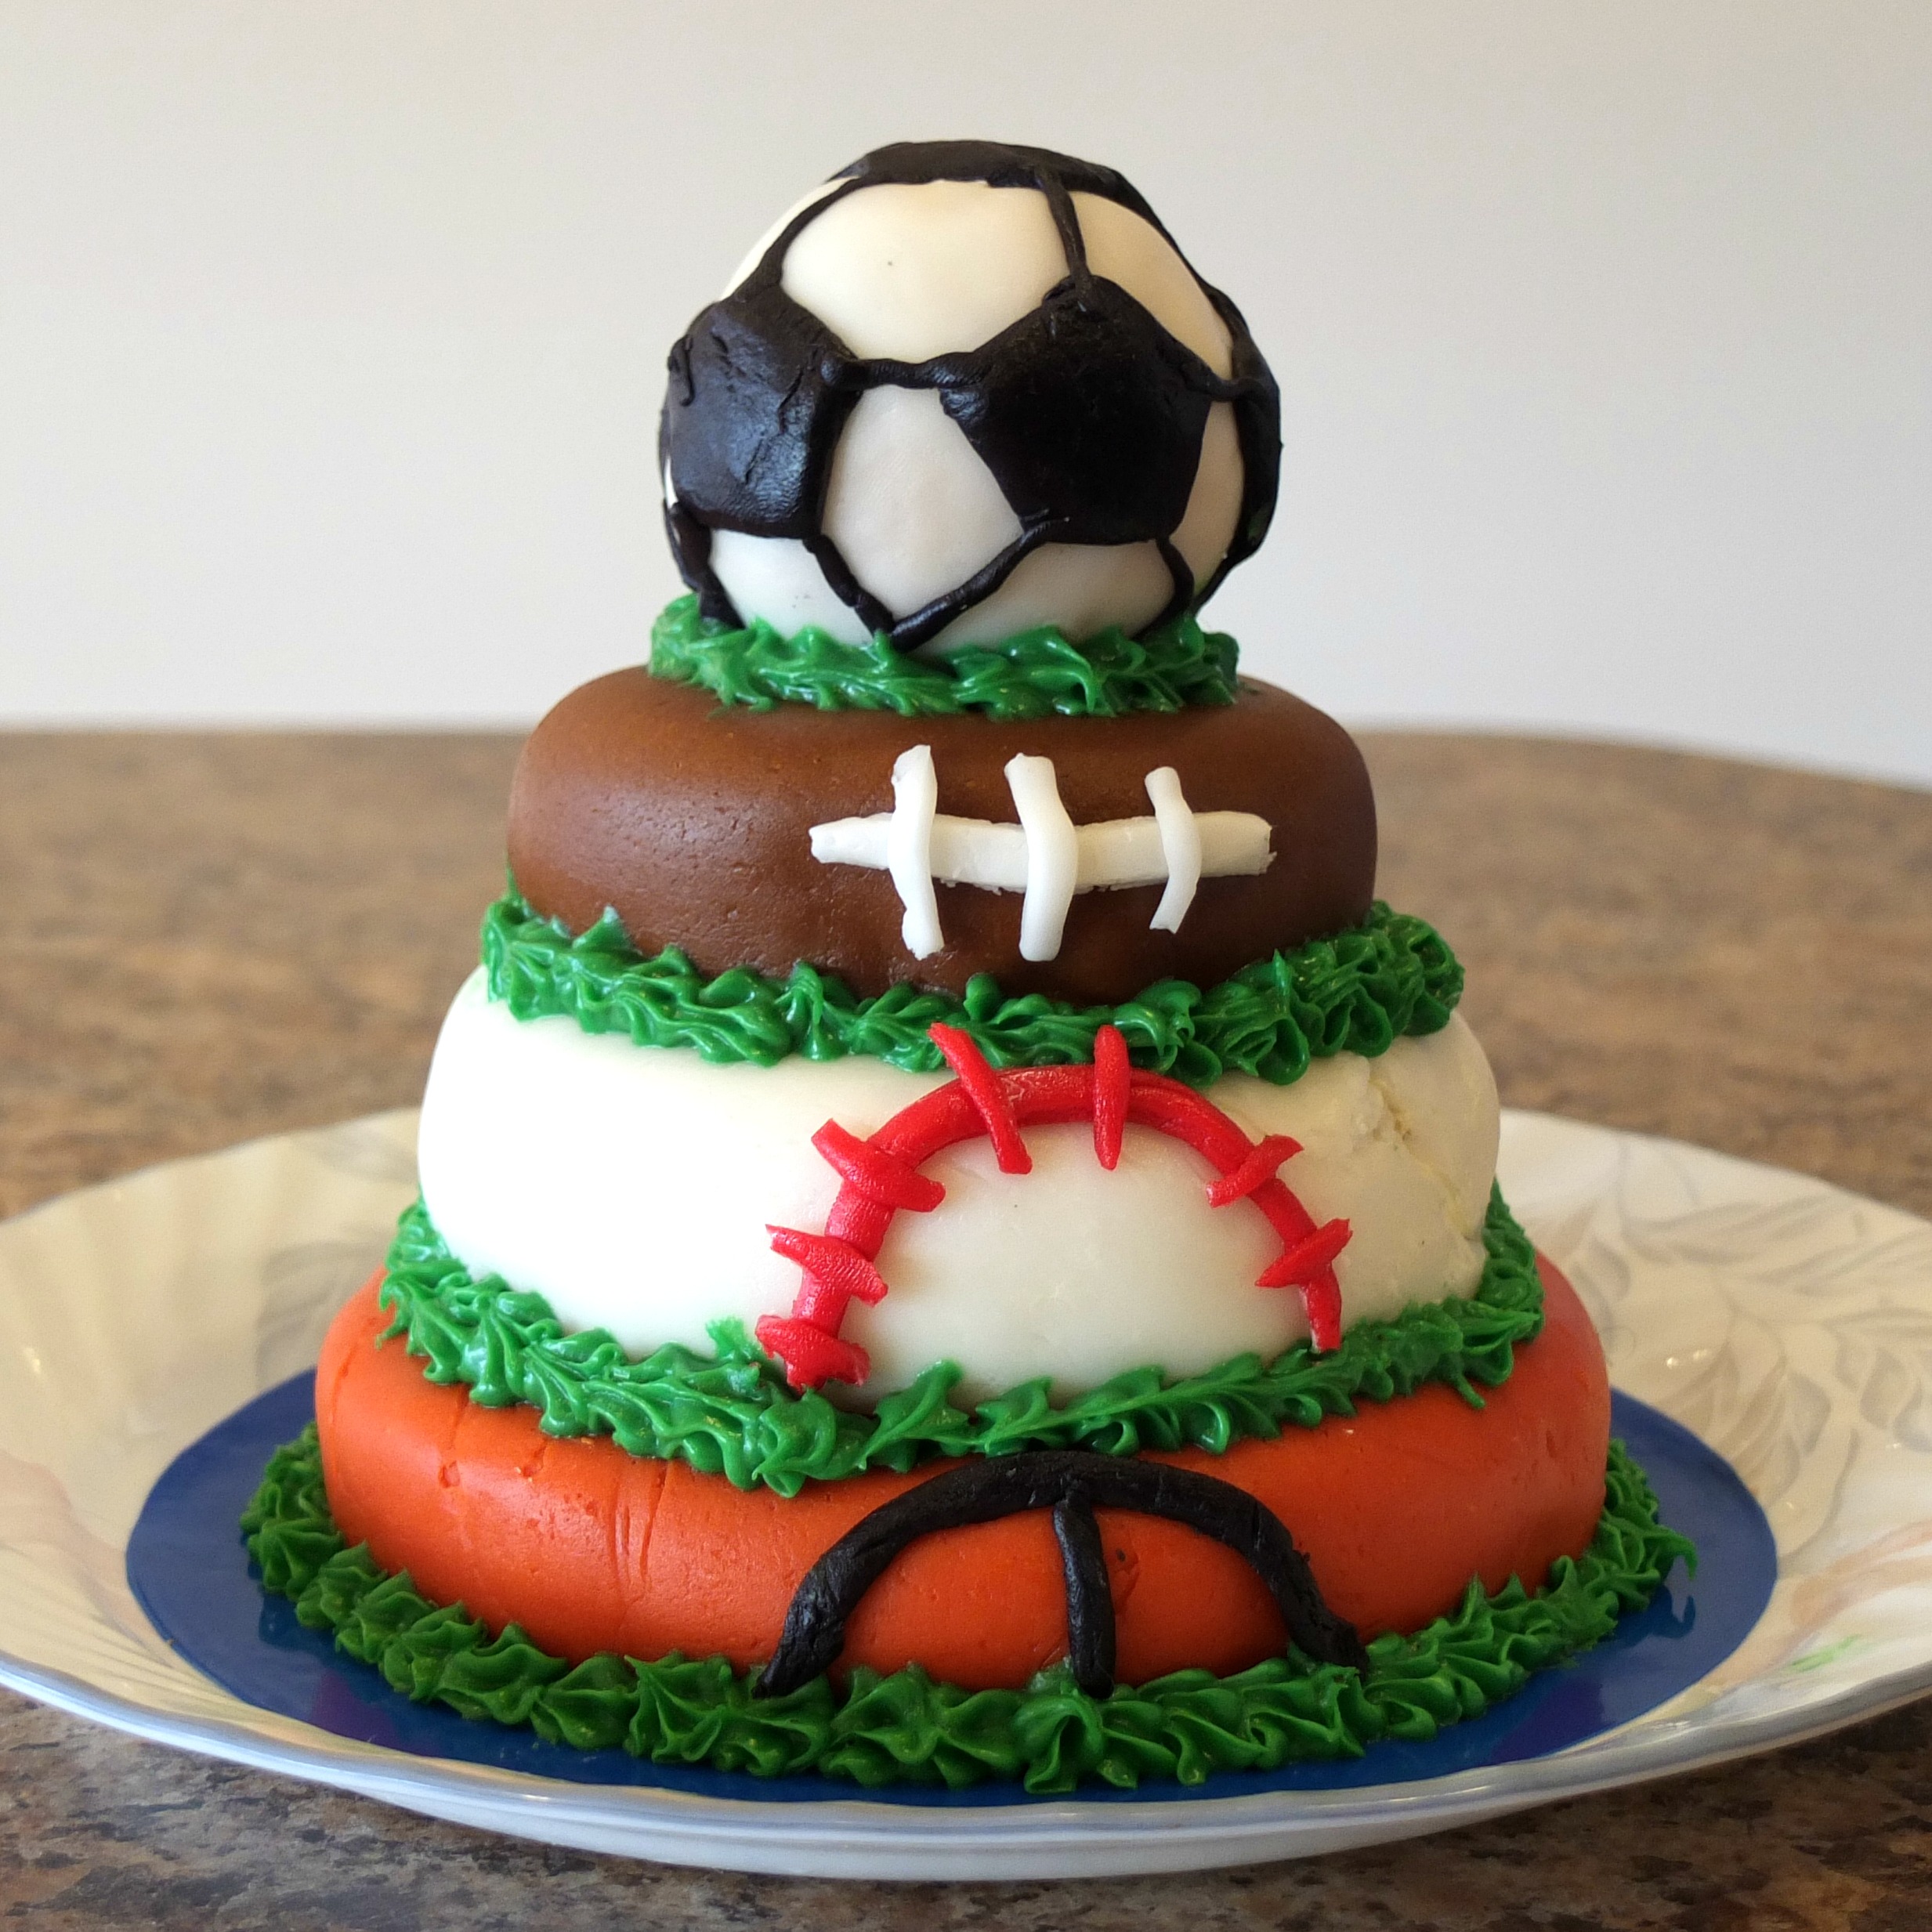 Let's Have a Ball! Ball-themed birthday party ideas.